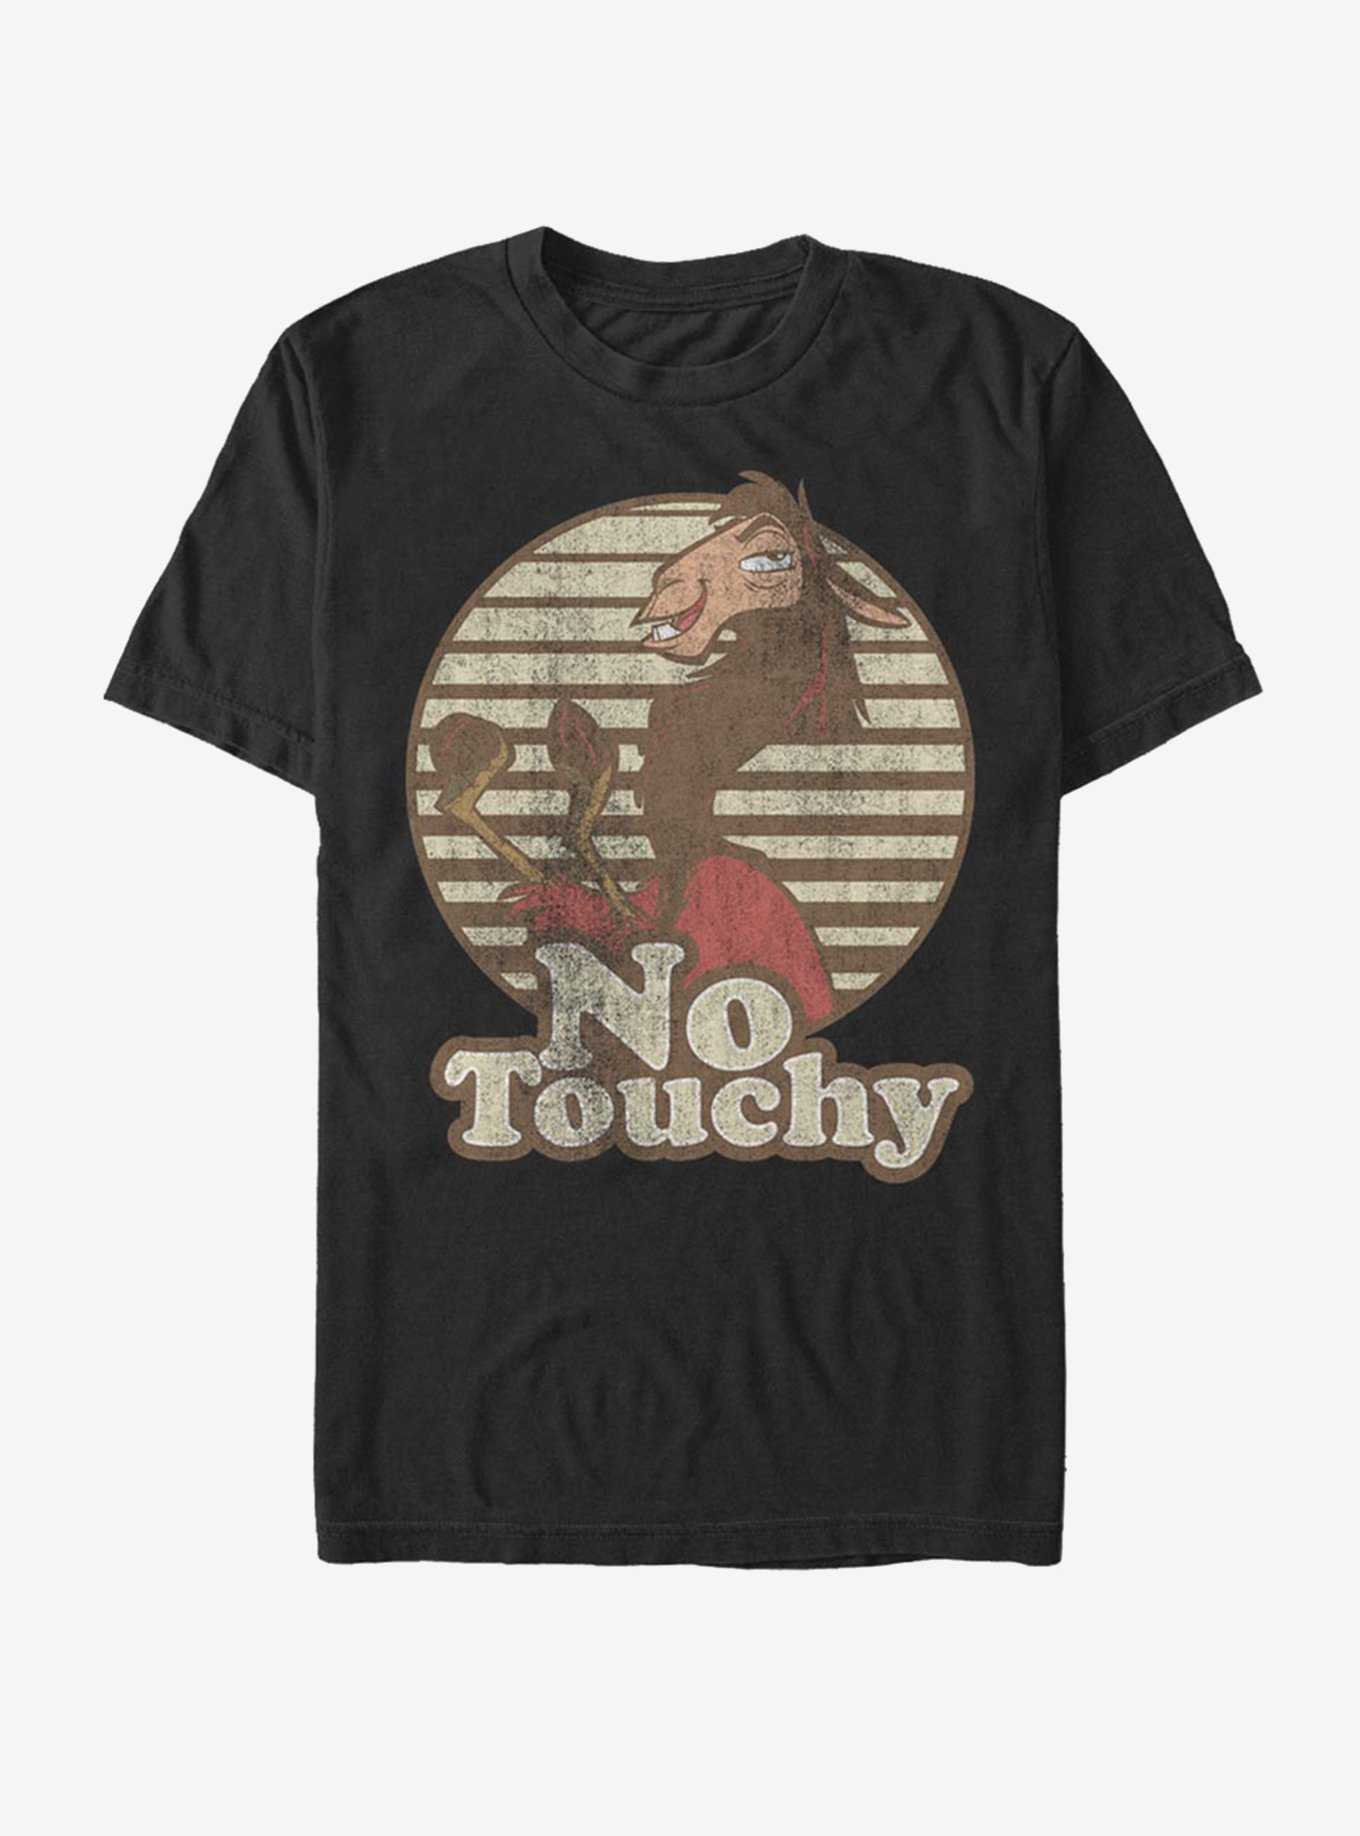 Disney The Emperor's New Groove No Touchy T-Shirt, BLACK, hi-res